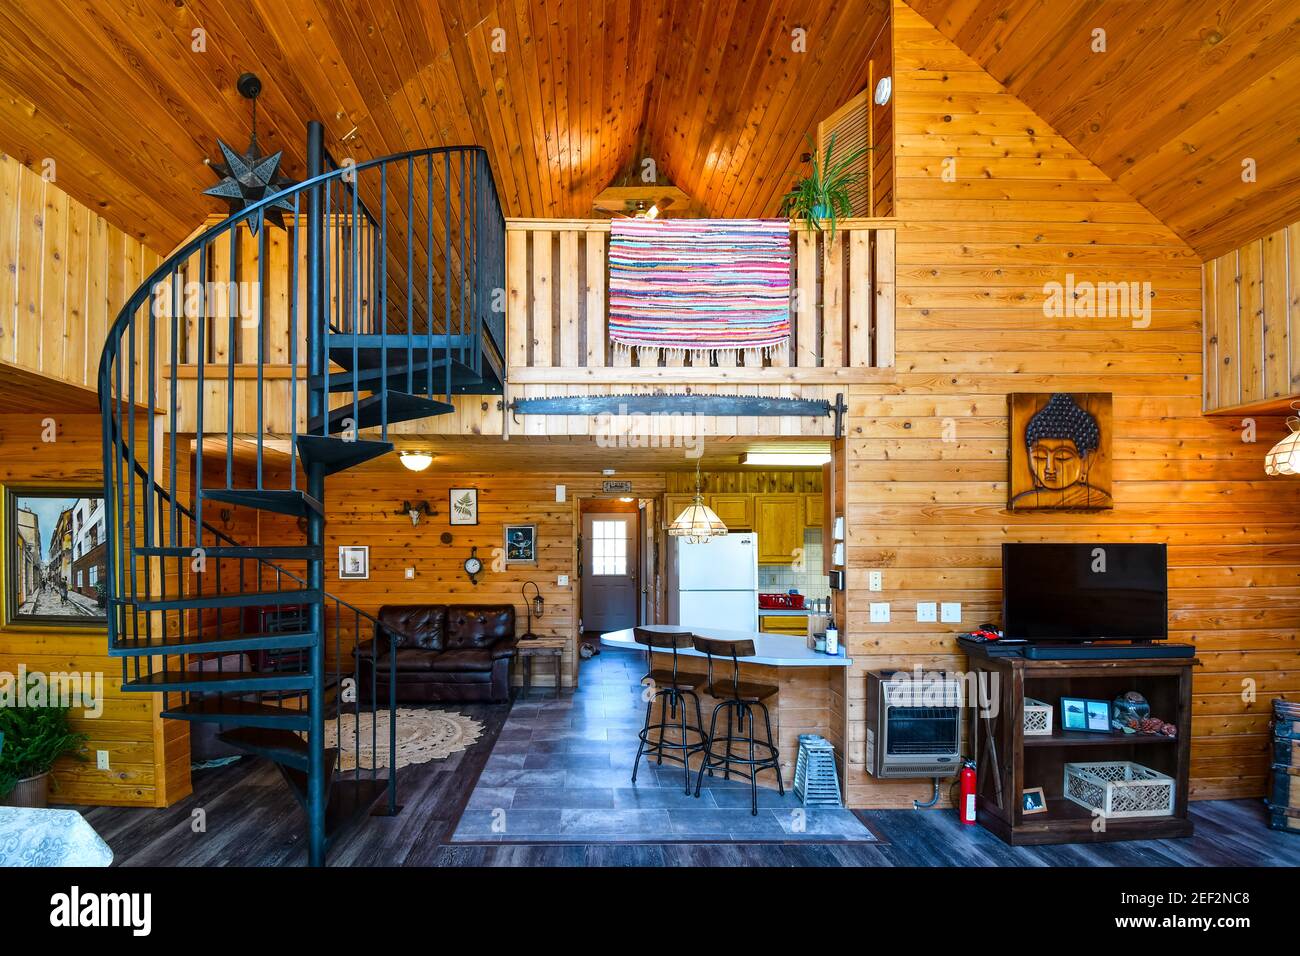 Interior view of an upscale rustic log home with wooden cedar planks, loft and spiral staircase. Stock Photo